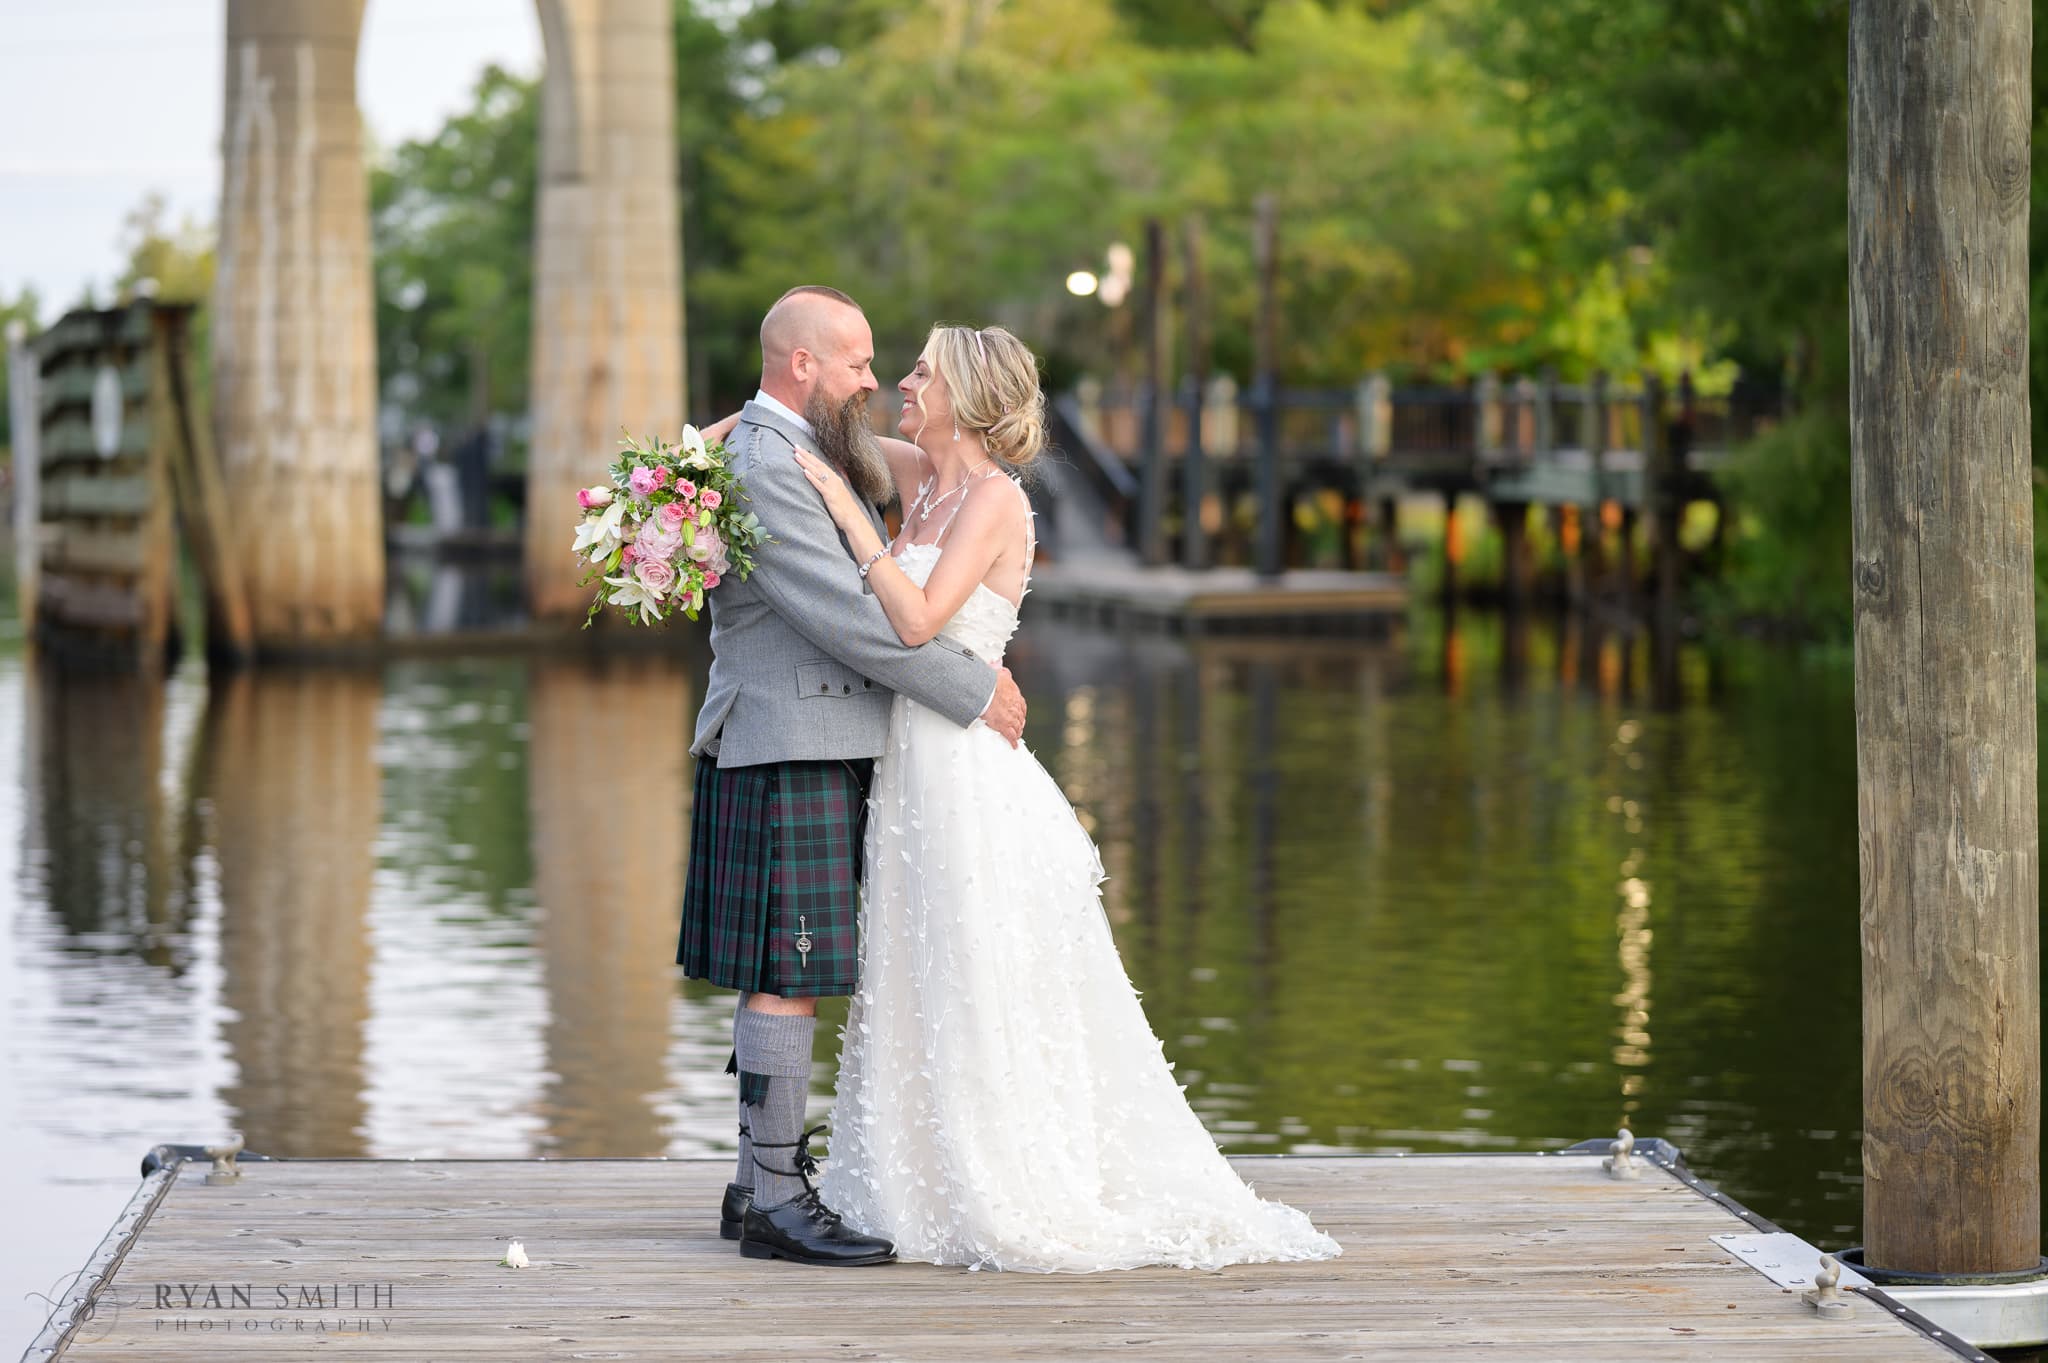 Embracing on the docks by the river - Conway Riverwalk